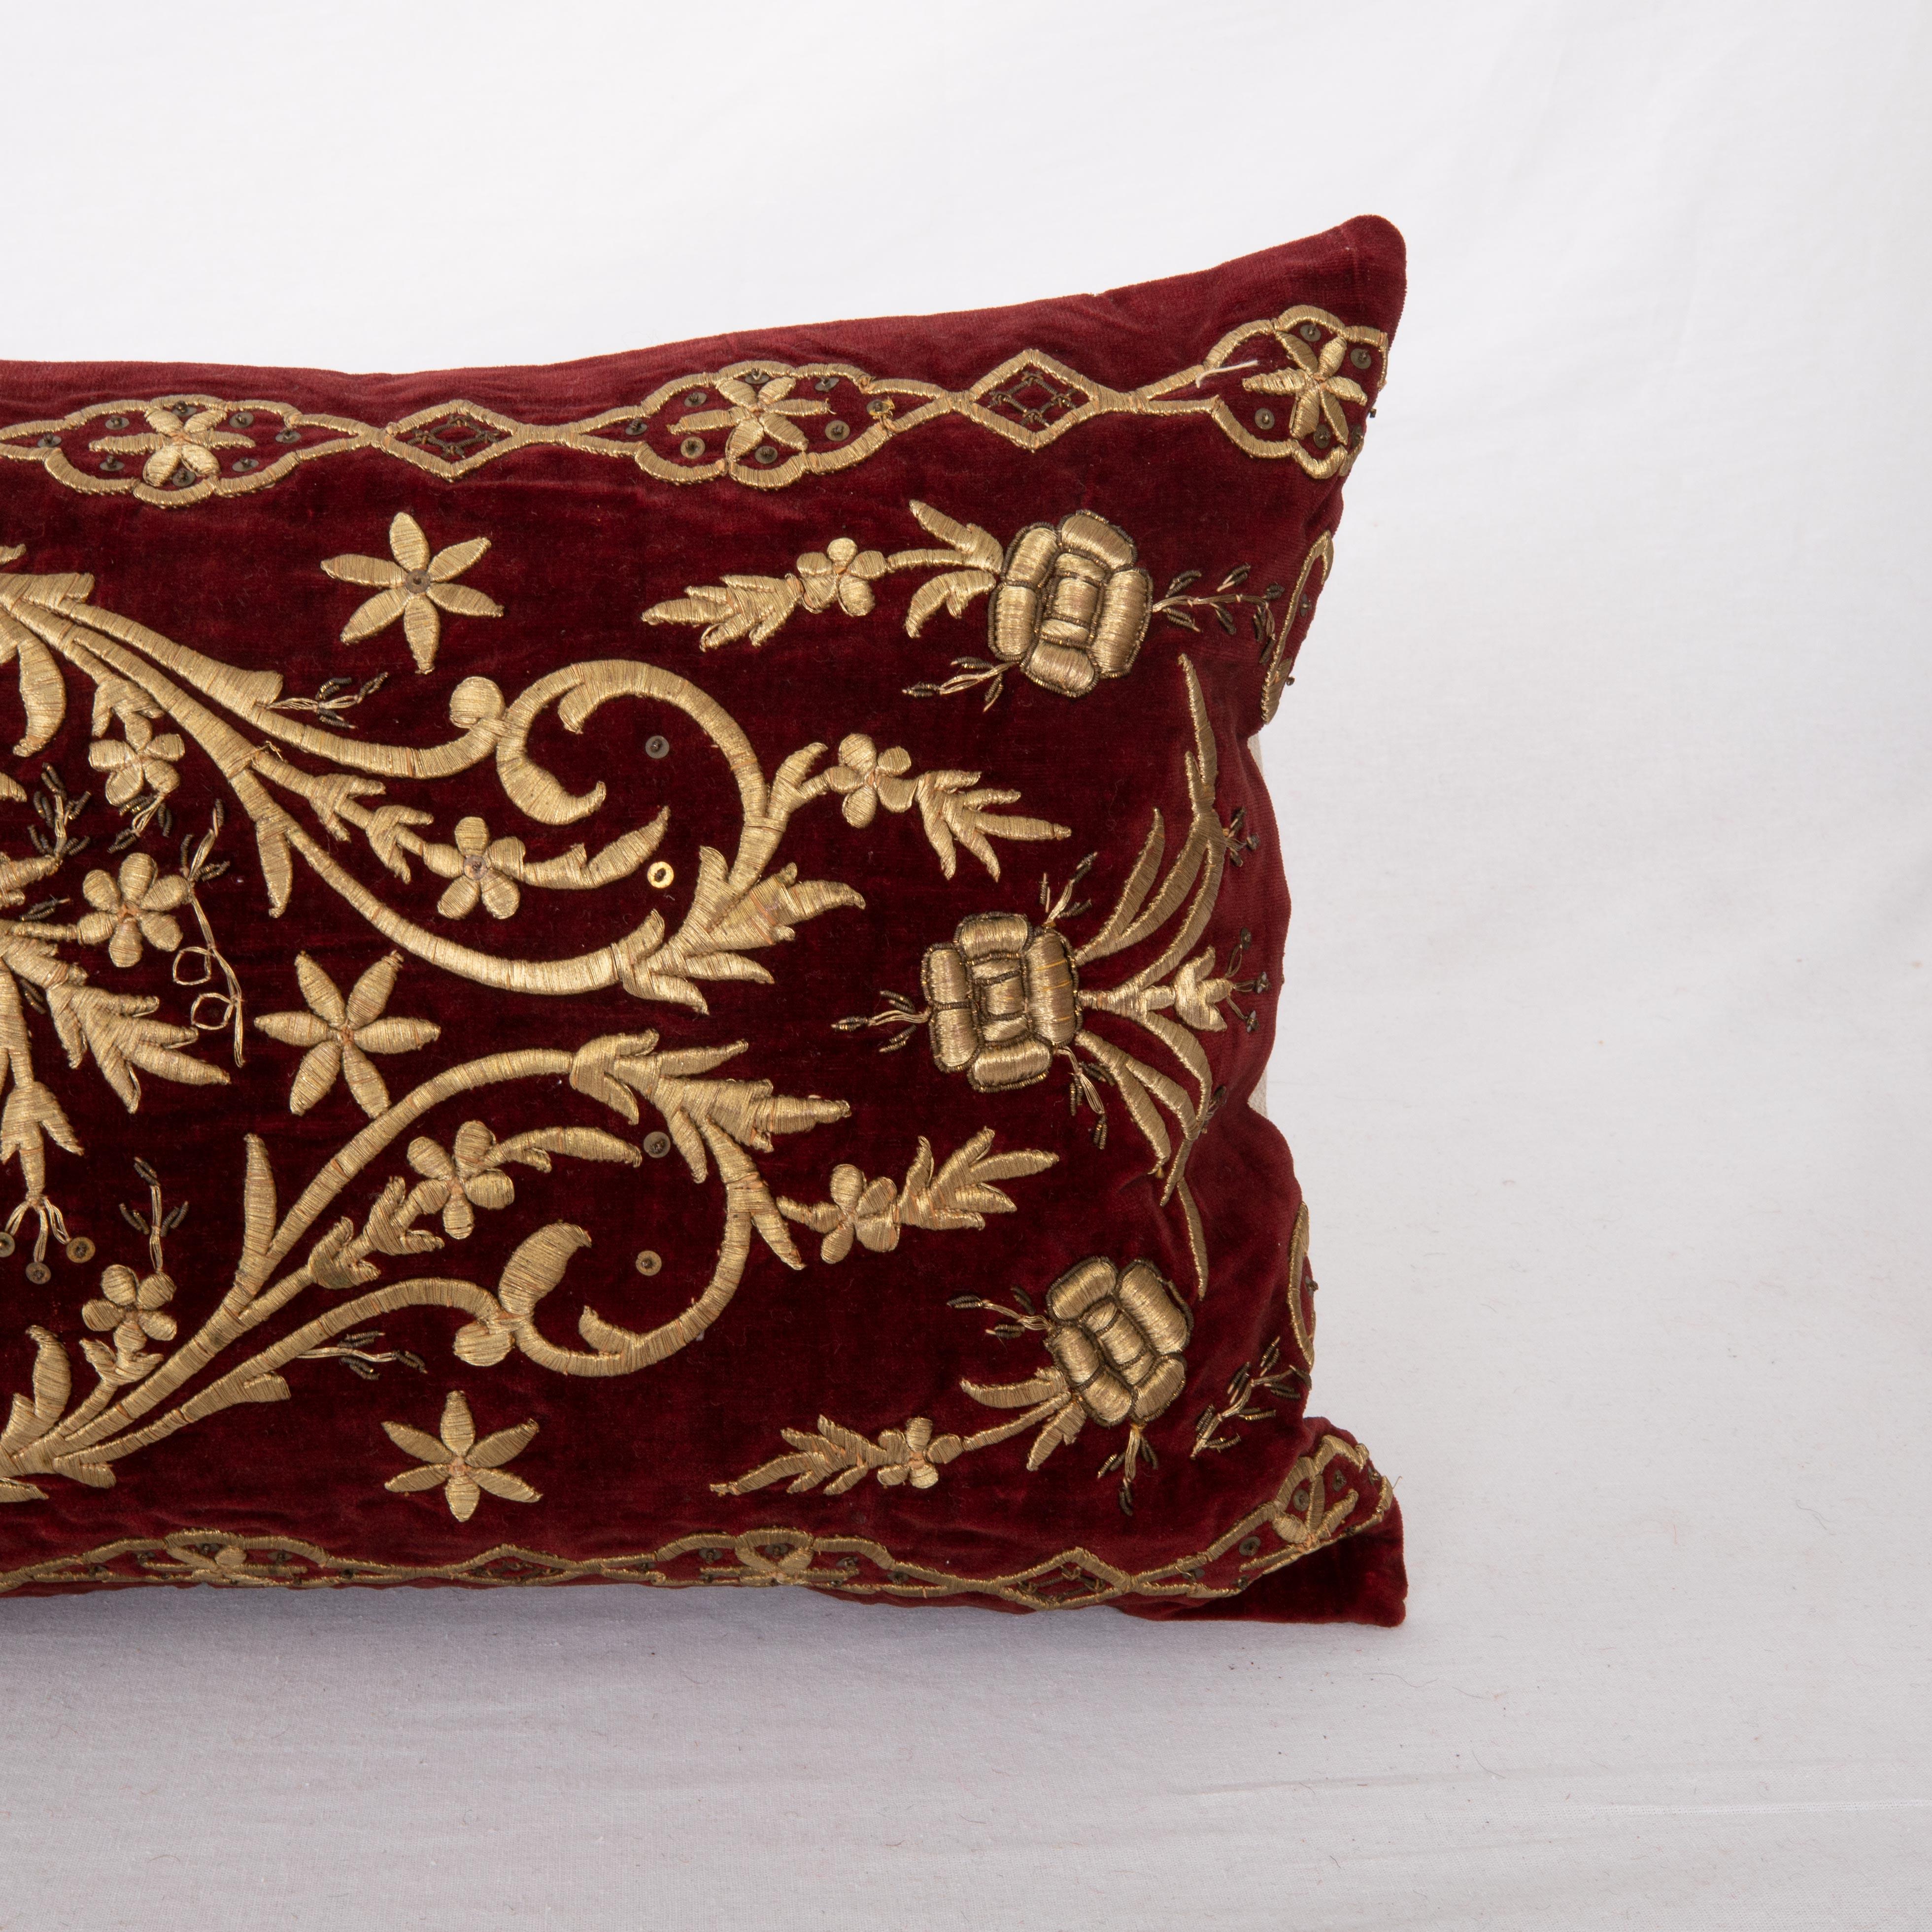 Embroidered Antique Silk Velvet Ottoman Sarma Pillow Cover, Late 19th Century For Sale